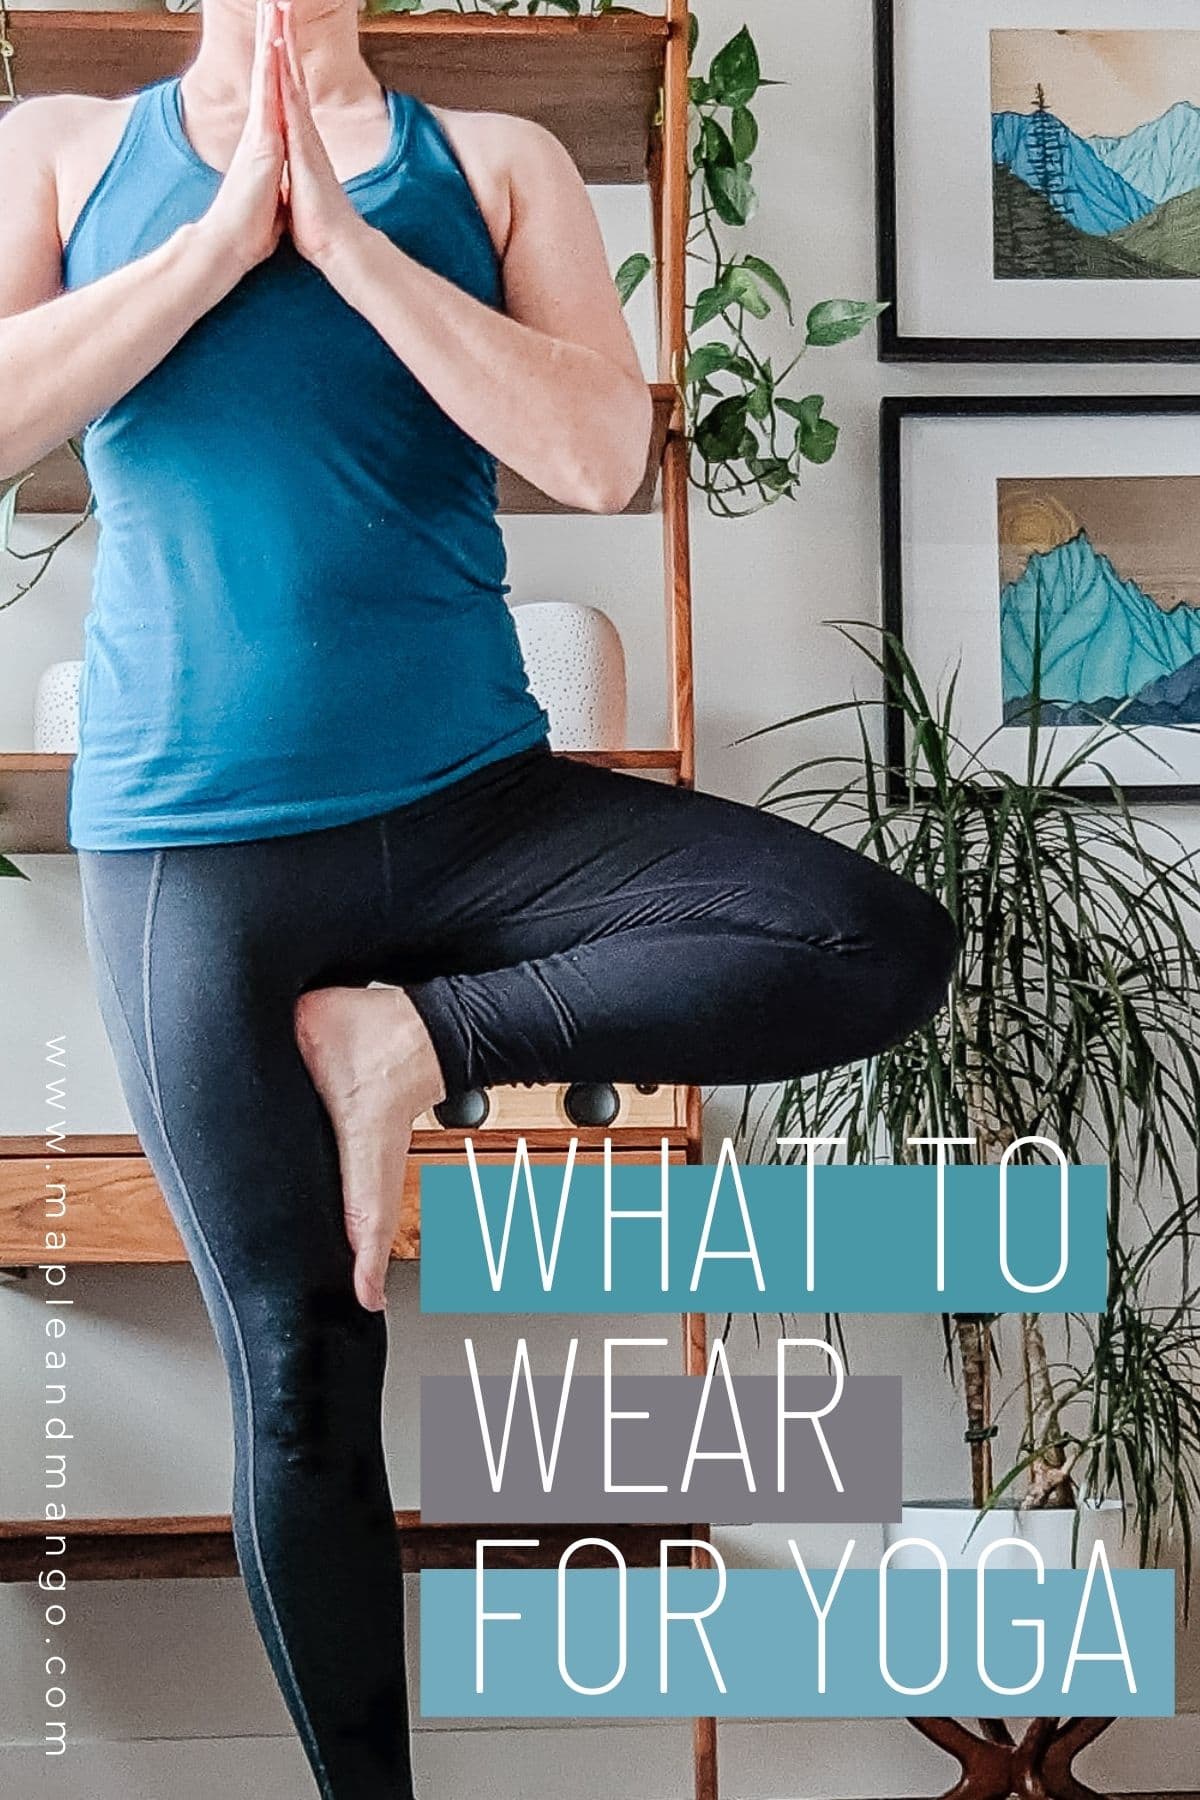 Woman standing in tree pose with text overlay that reads "What To Wear For Yoga".